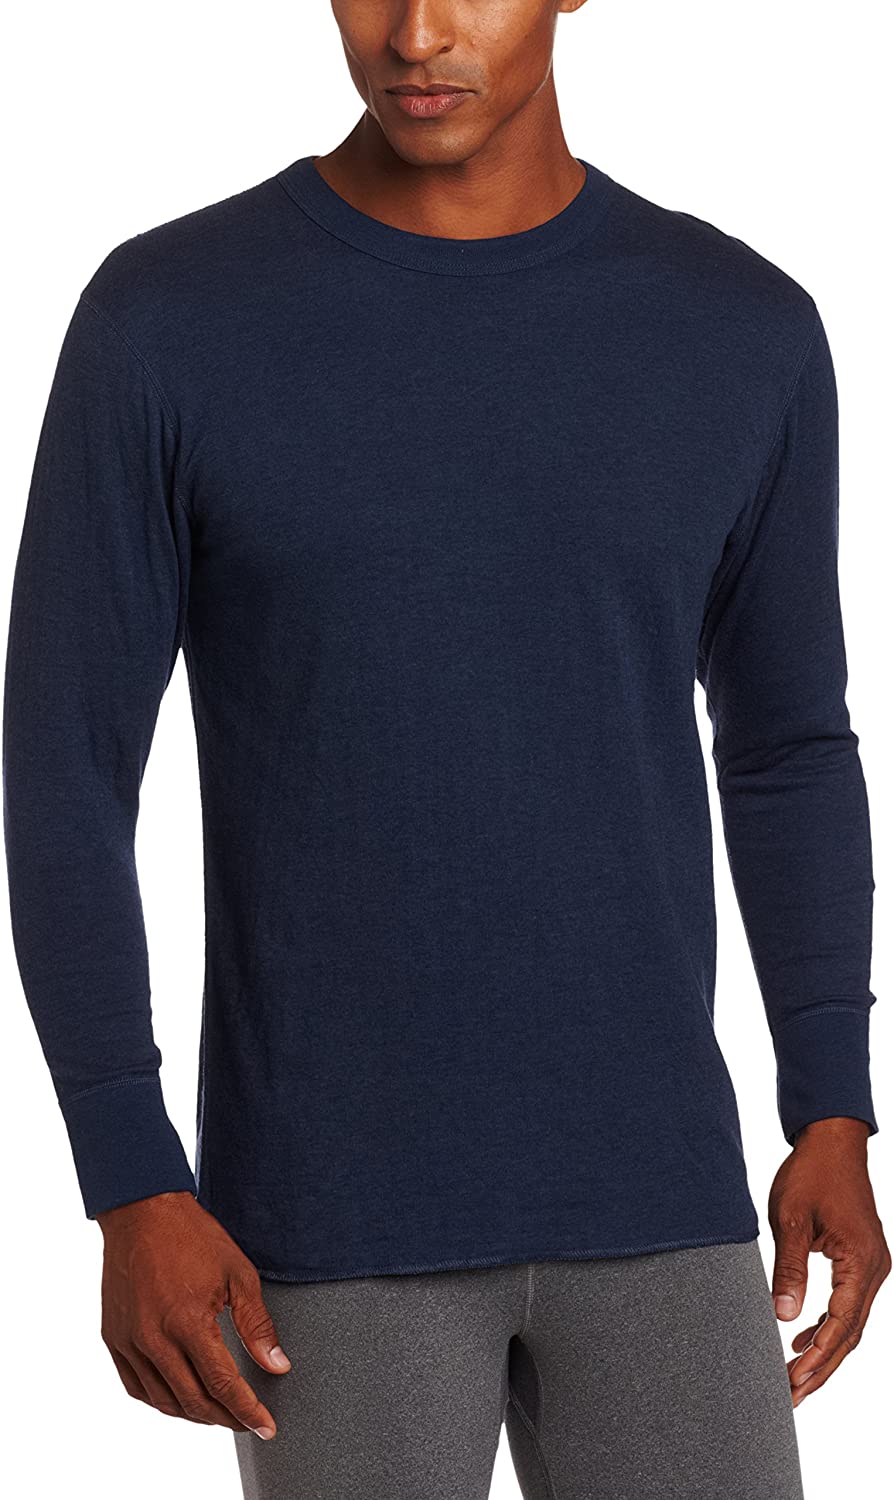 Duofold Mens Mid-Weight Thermal Crew-Neck Shirt 